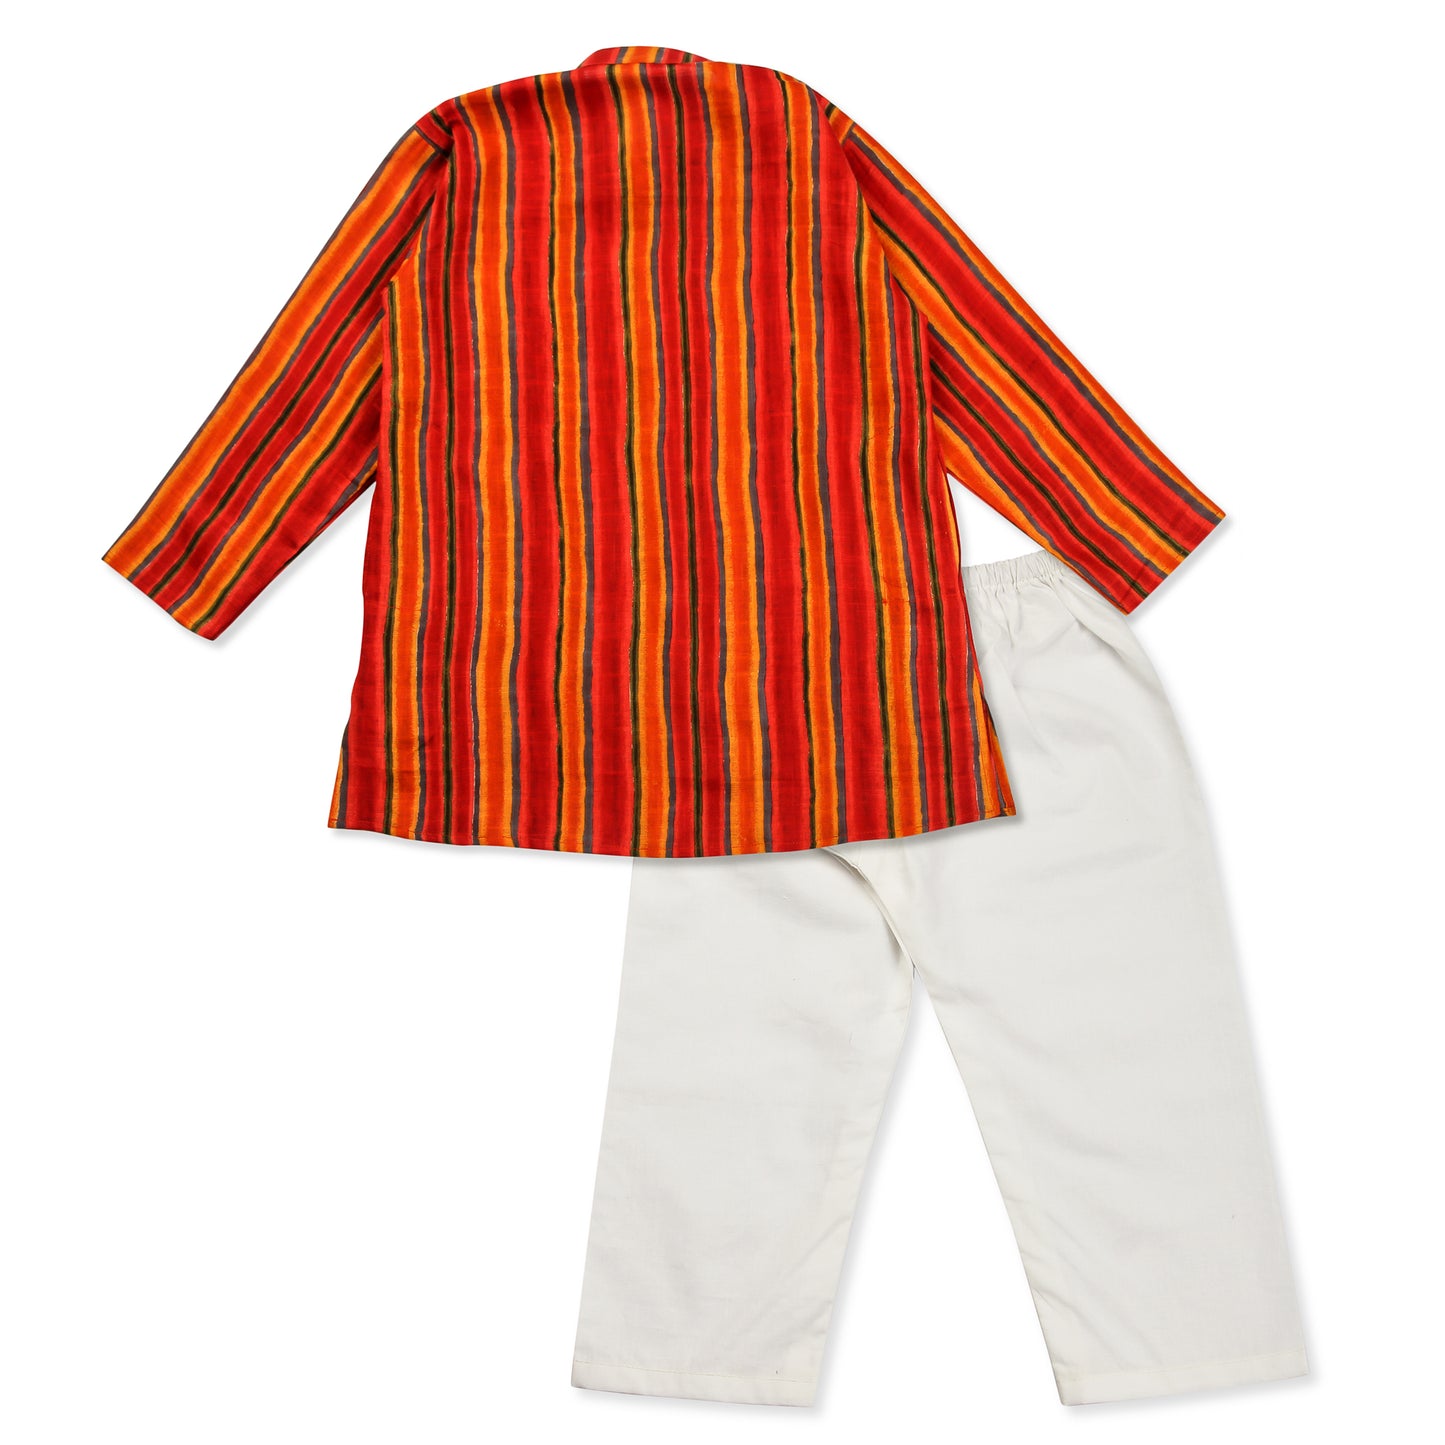 Multicolor Kurta Pajama for Boys, Ages 0-16 Years, Cotton, Striped